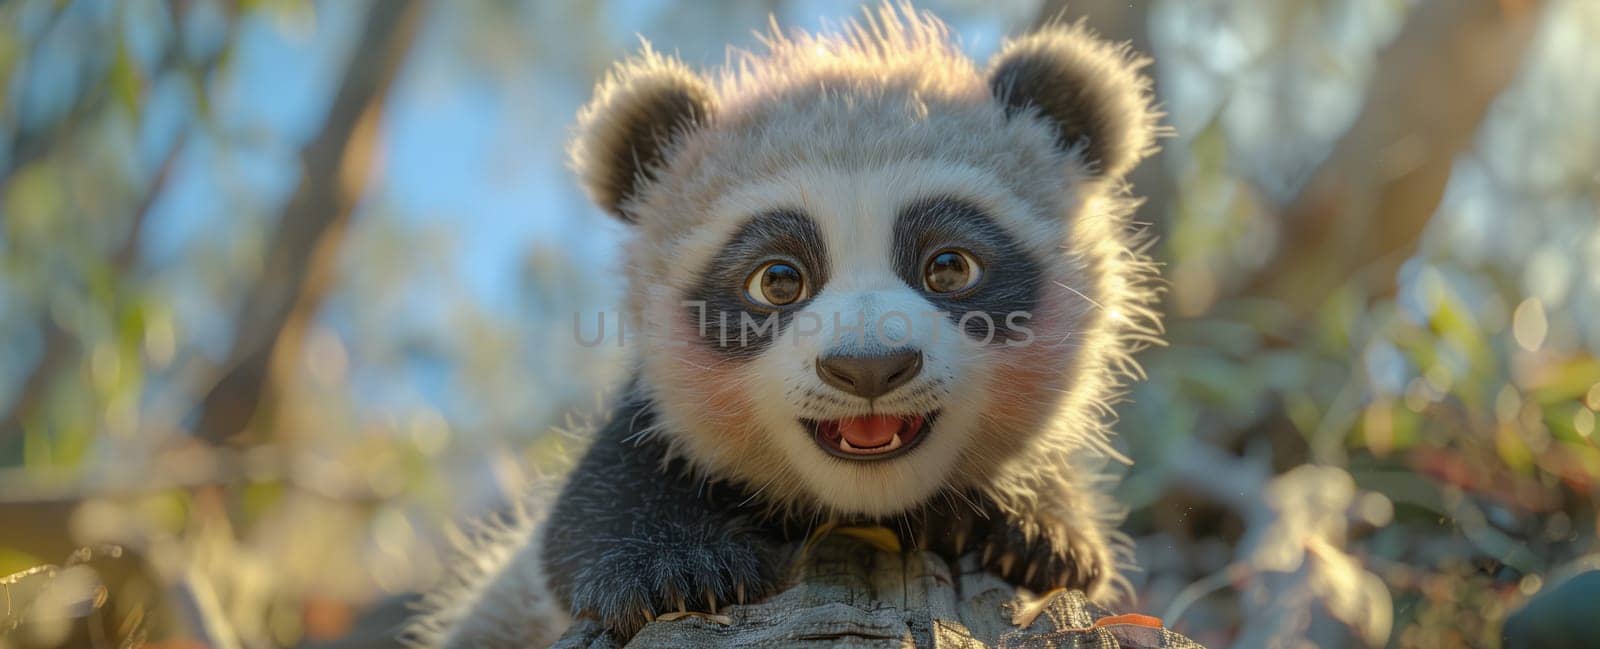 Carnivore panda with whiskers sitting on rock in jungle, smiling at camera by richwolf